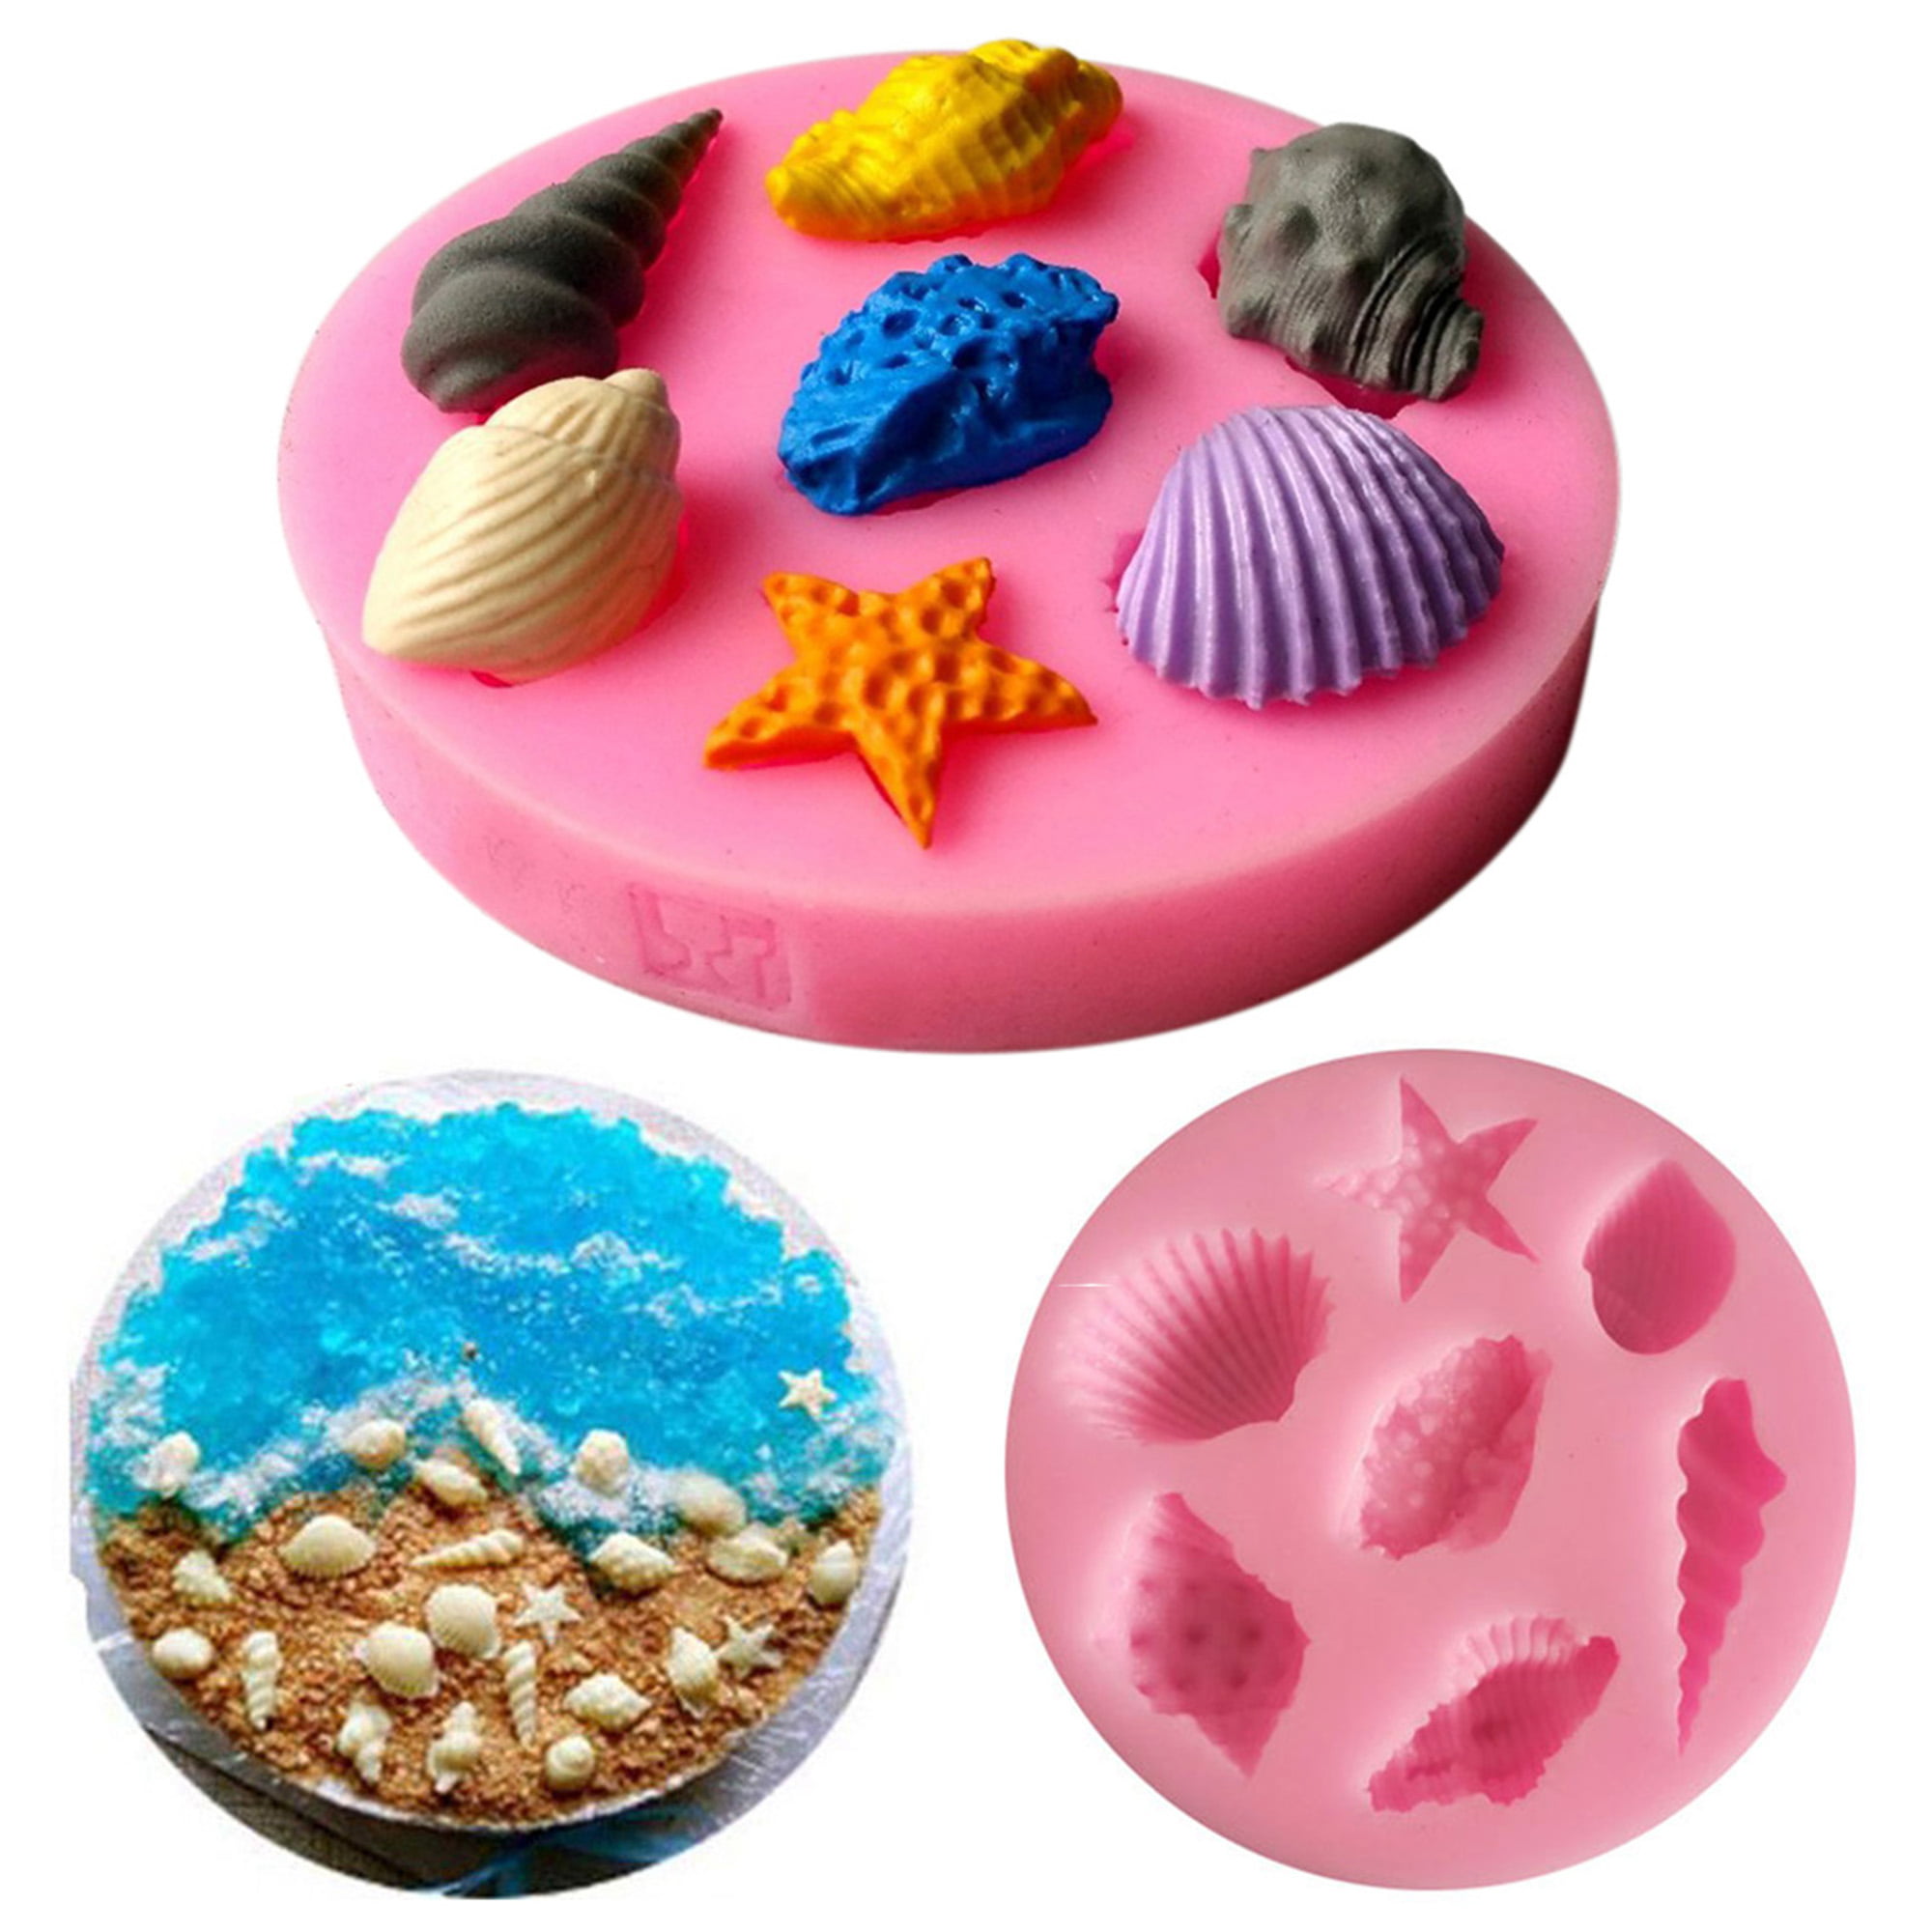 20 Cells DIY Cake Chocolate Candy Decor Sugar Craft Mold Cutter Silicone Tools